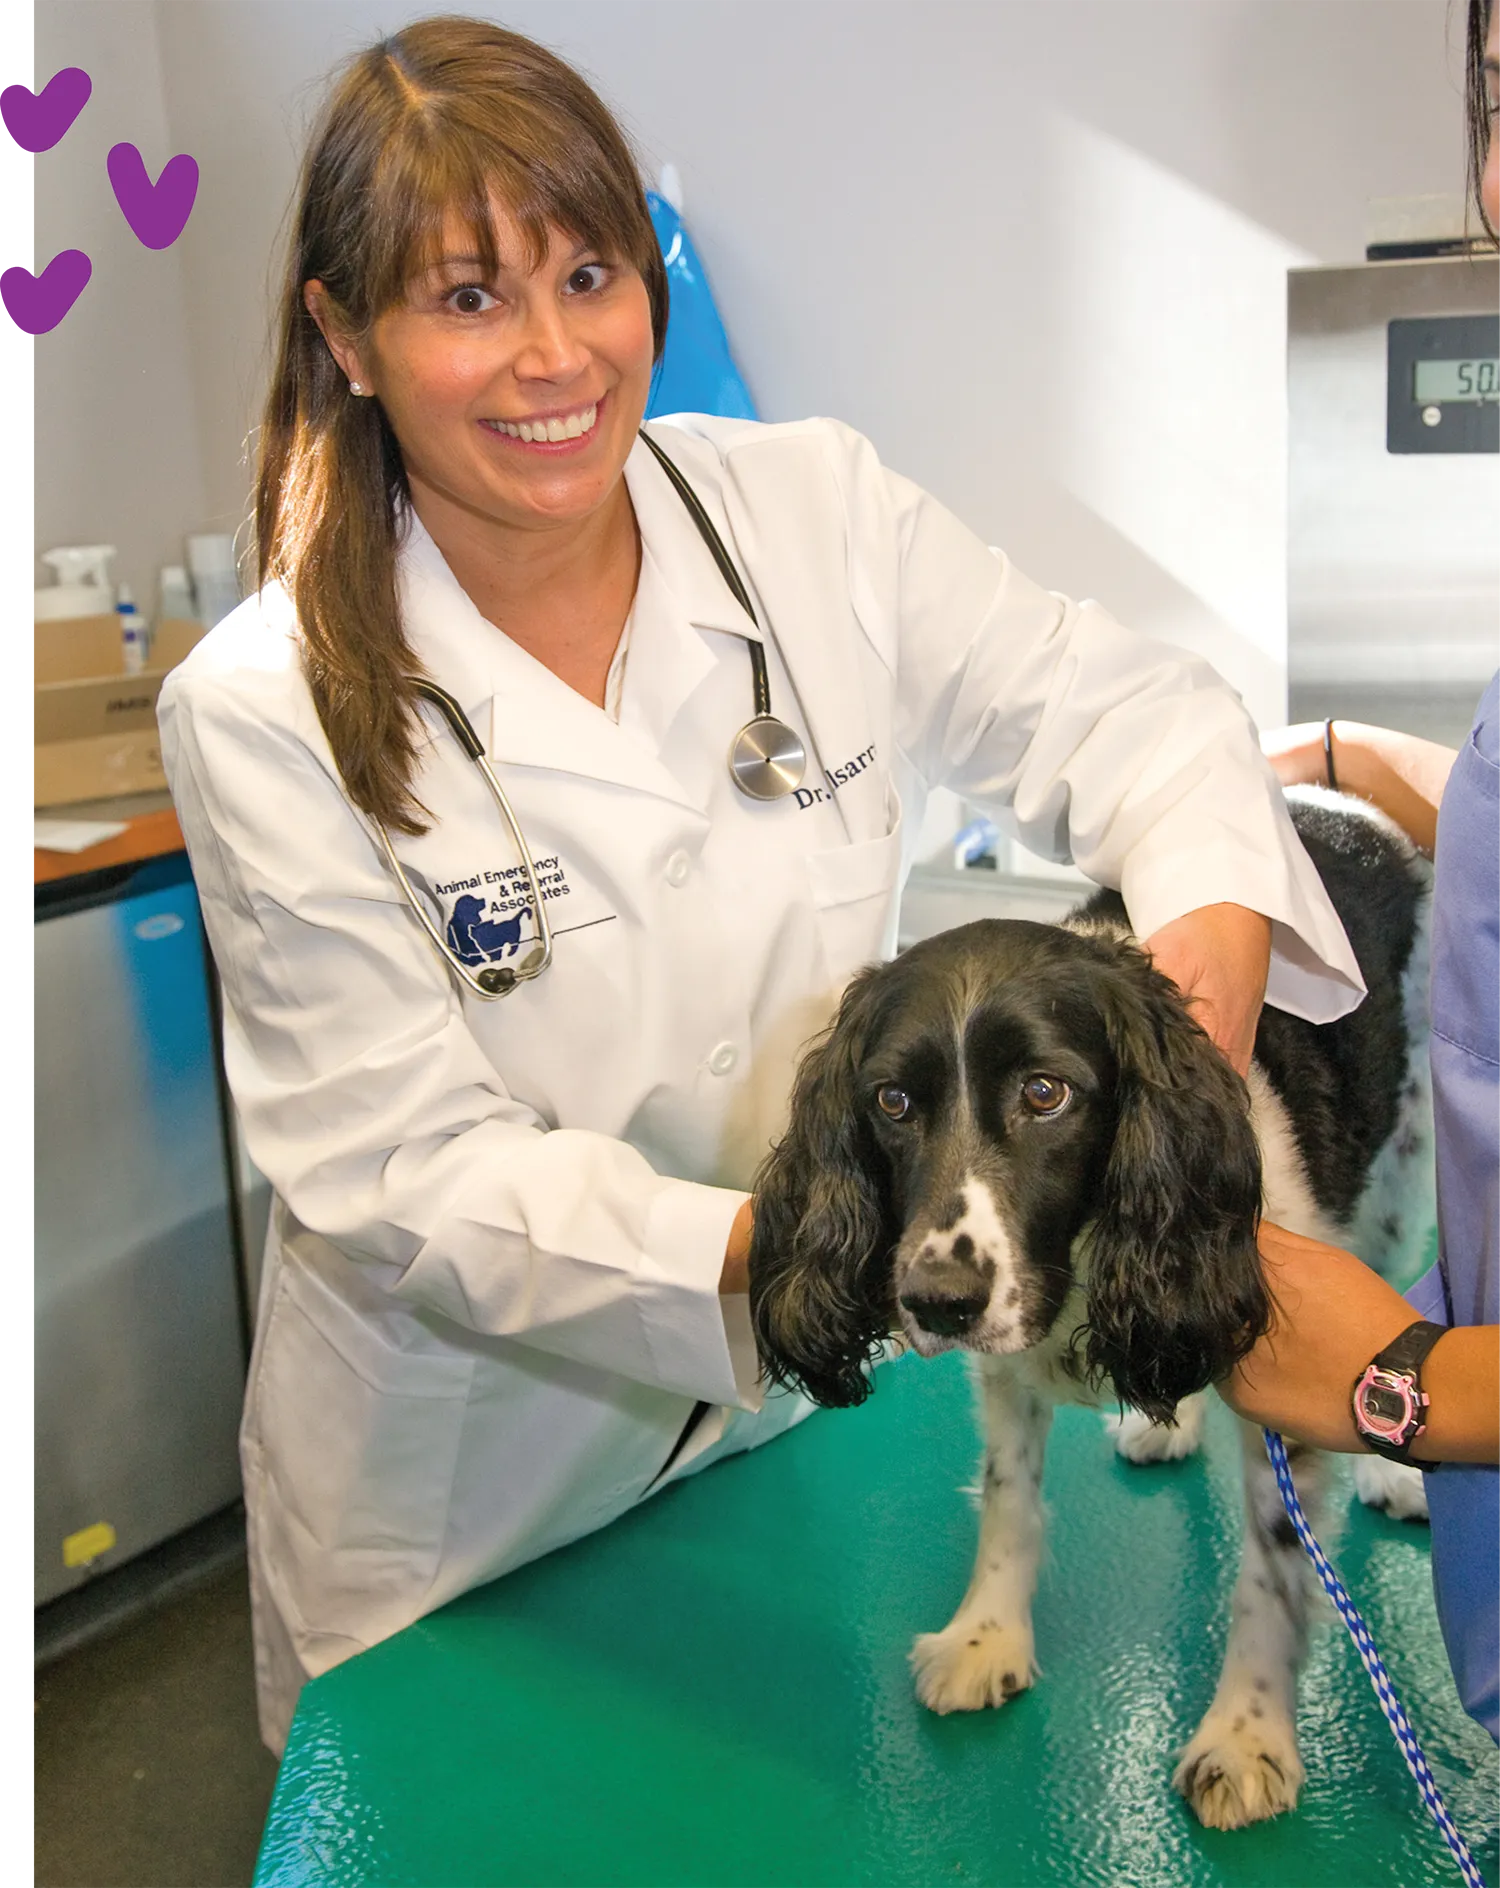 Dr. Renee Alsarraf smiles while examining a dog on a table